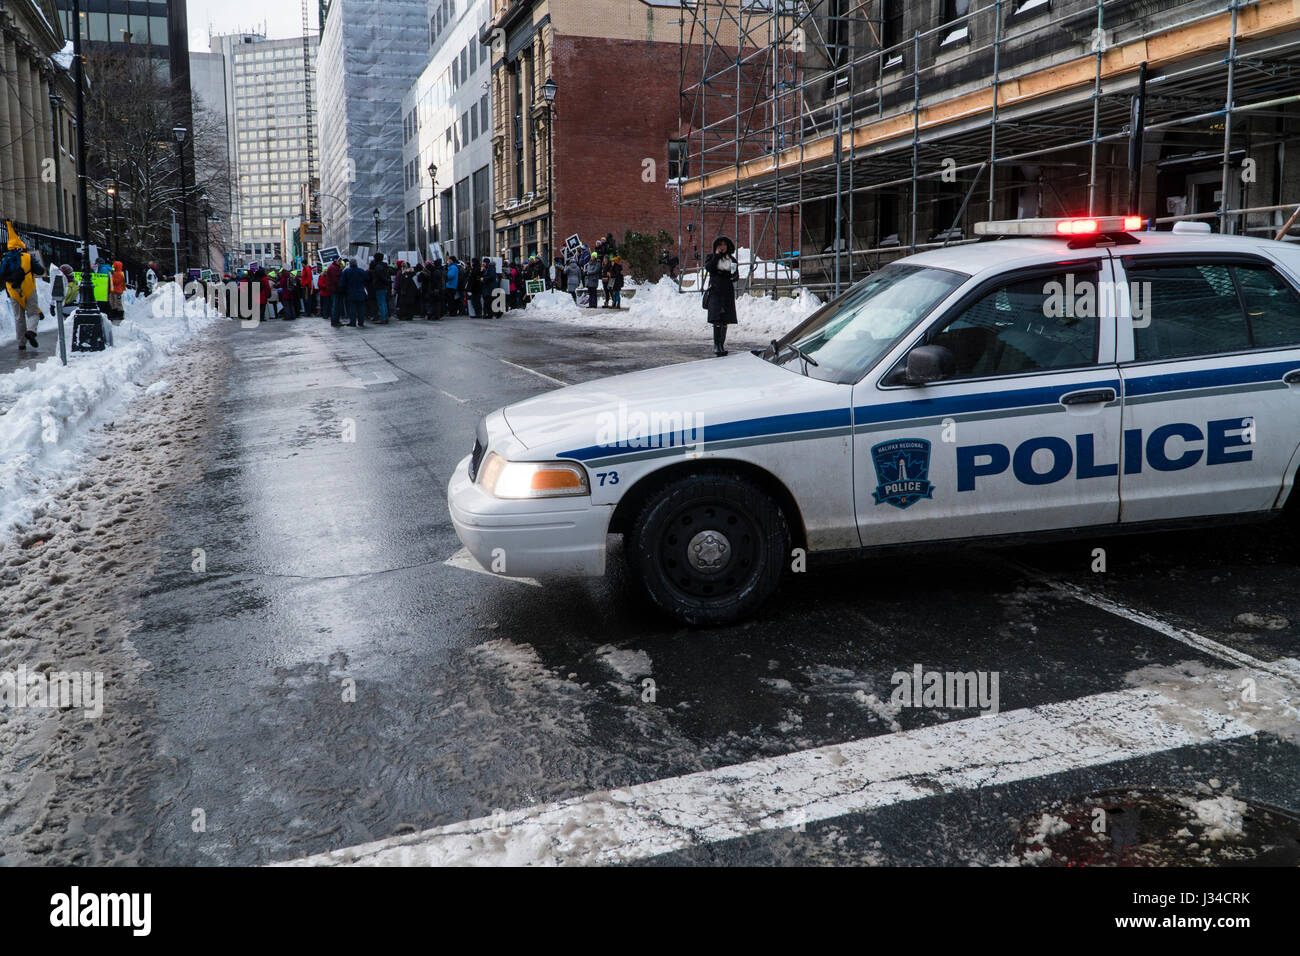 Police car with flashing lights watches over a group of protesting teachers in Halifax, Nova Scotia, Canada. Stock Photo